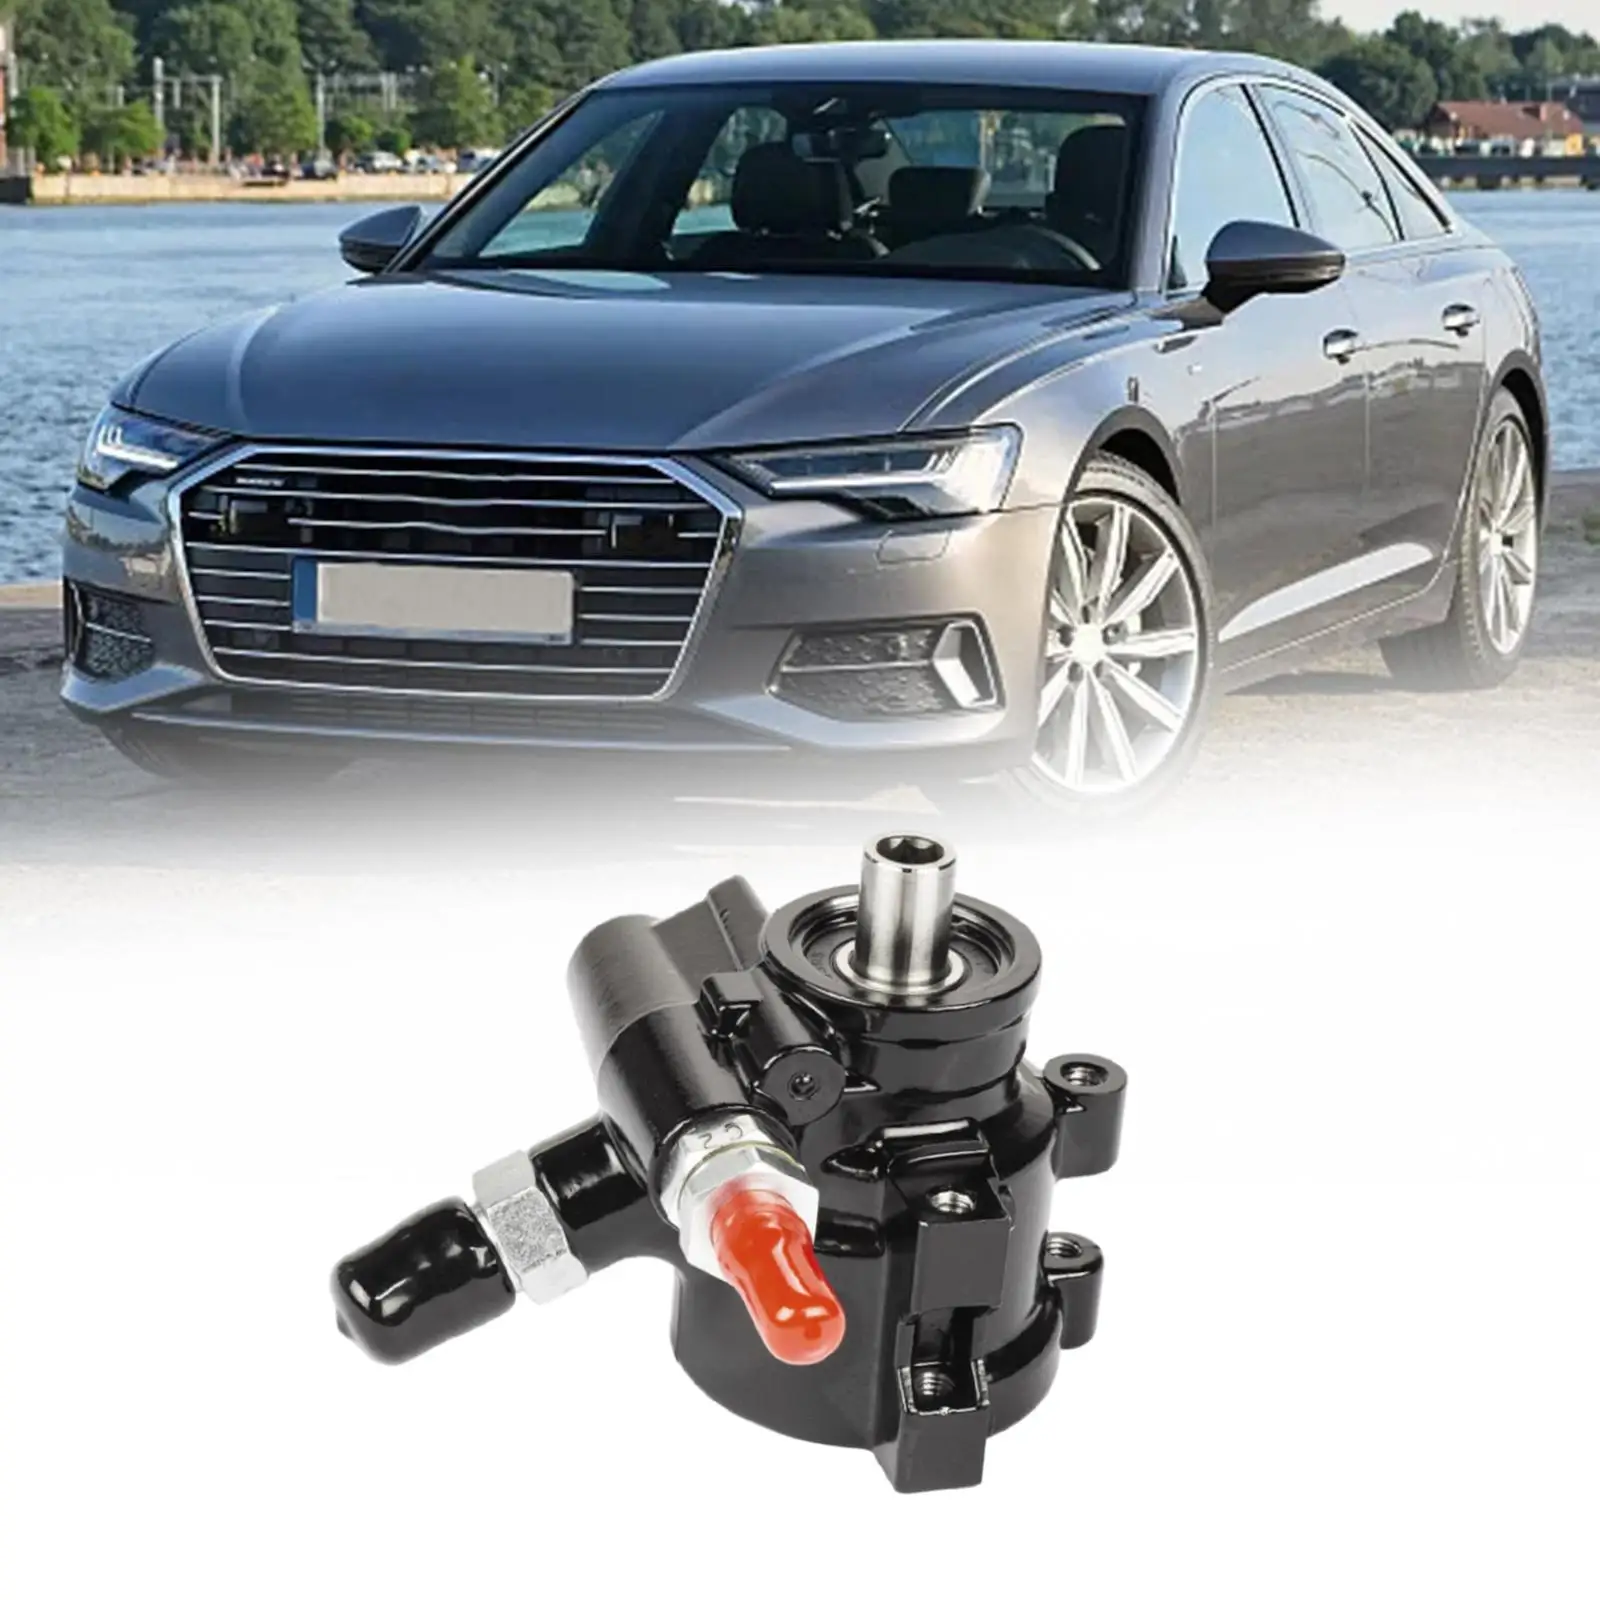 Power Steering Pump, Replacement Repair Part Easy to Install High Performance